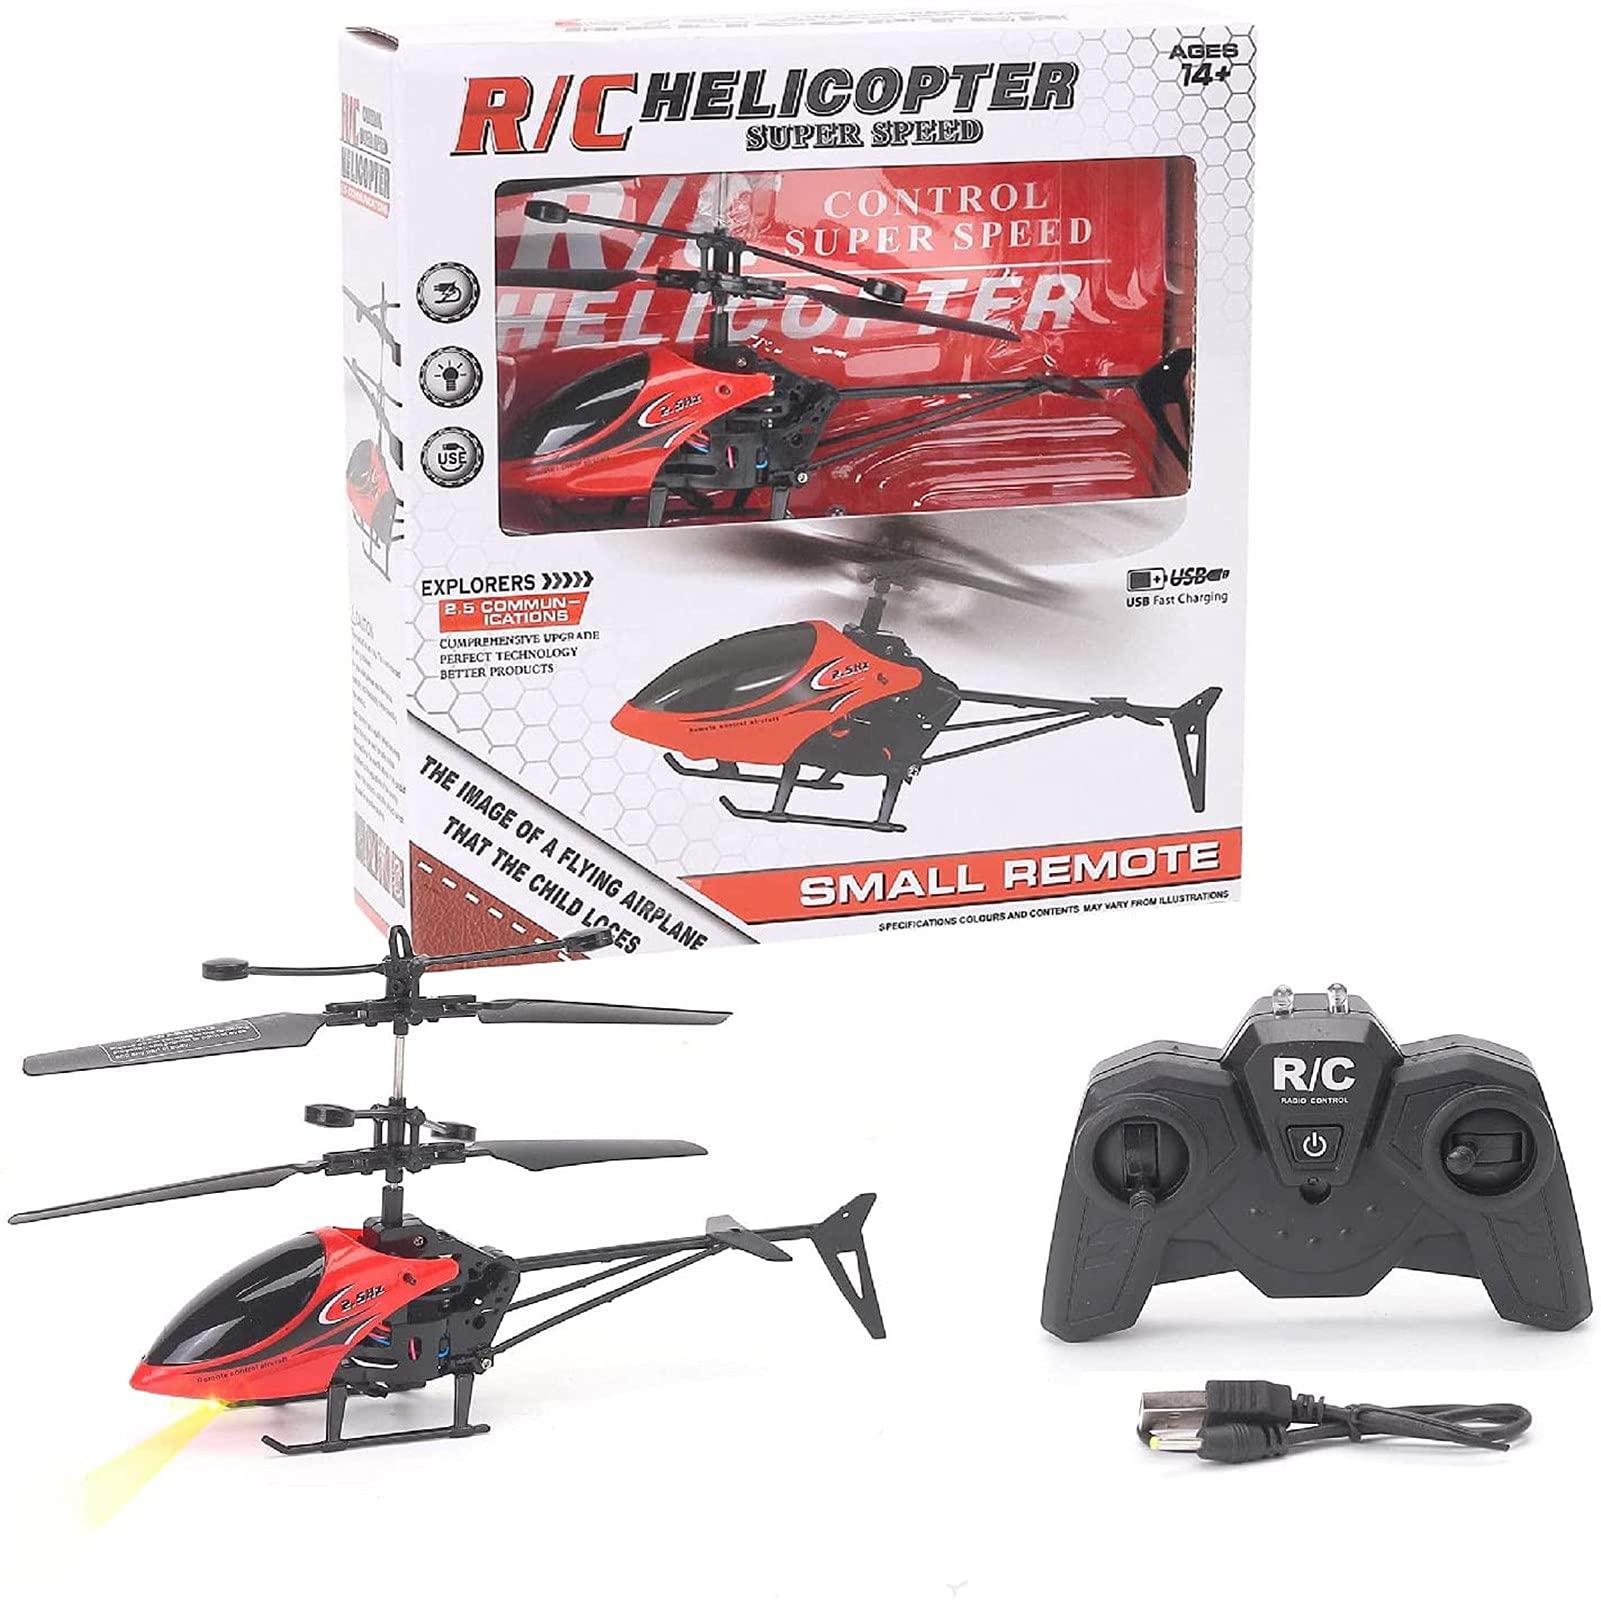 Remote Control Helicopter Below 100: Proper battery charging and basic controls are crucial for safe and efficient remote control helicopter flying 